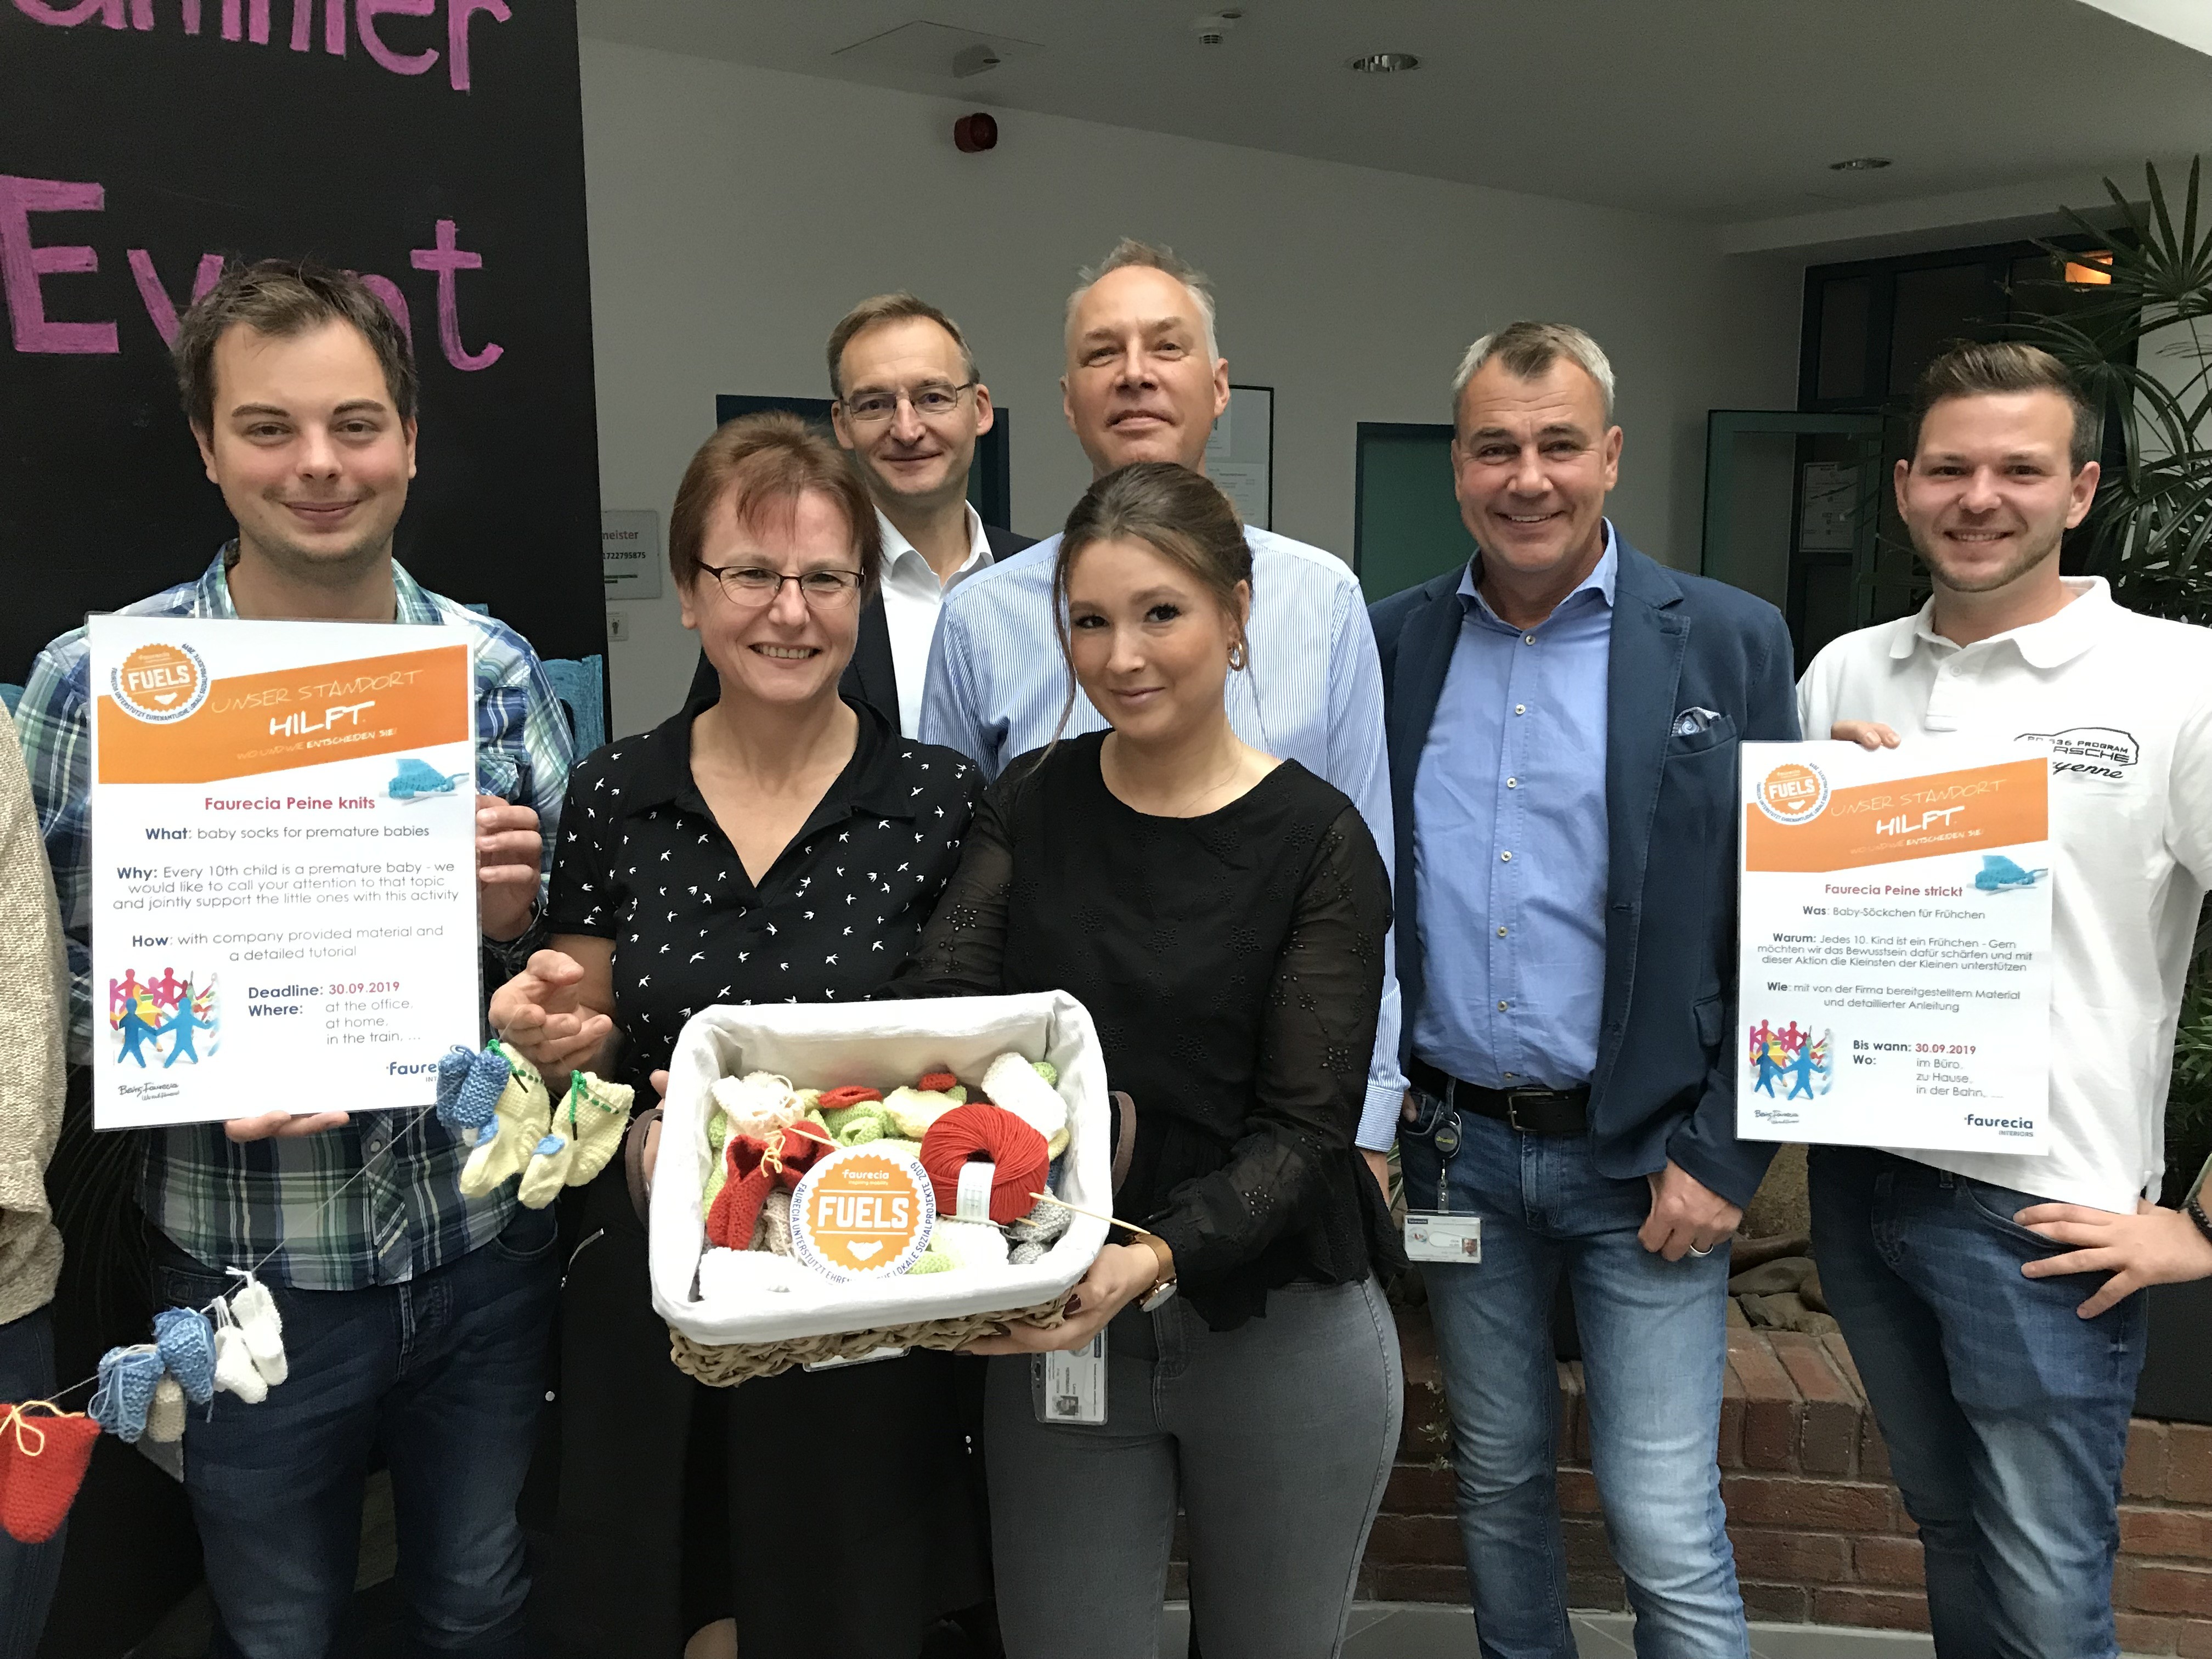 The employees of the Tech Center in Peine presented the premature baby ward of the Helios Clinic with a donation of 100 self-knitted socks and 500 euros.